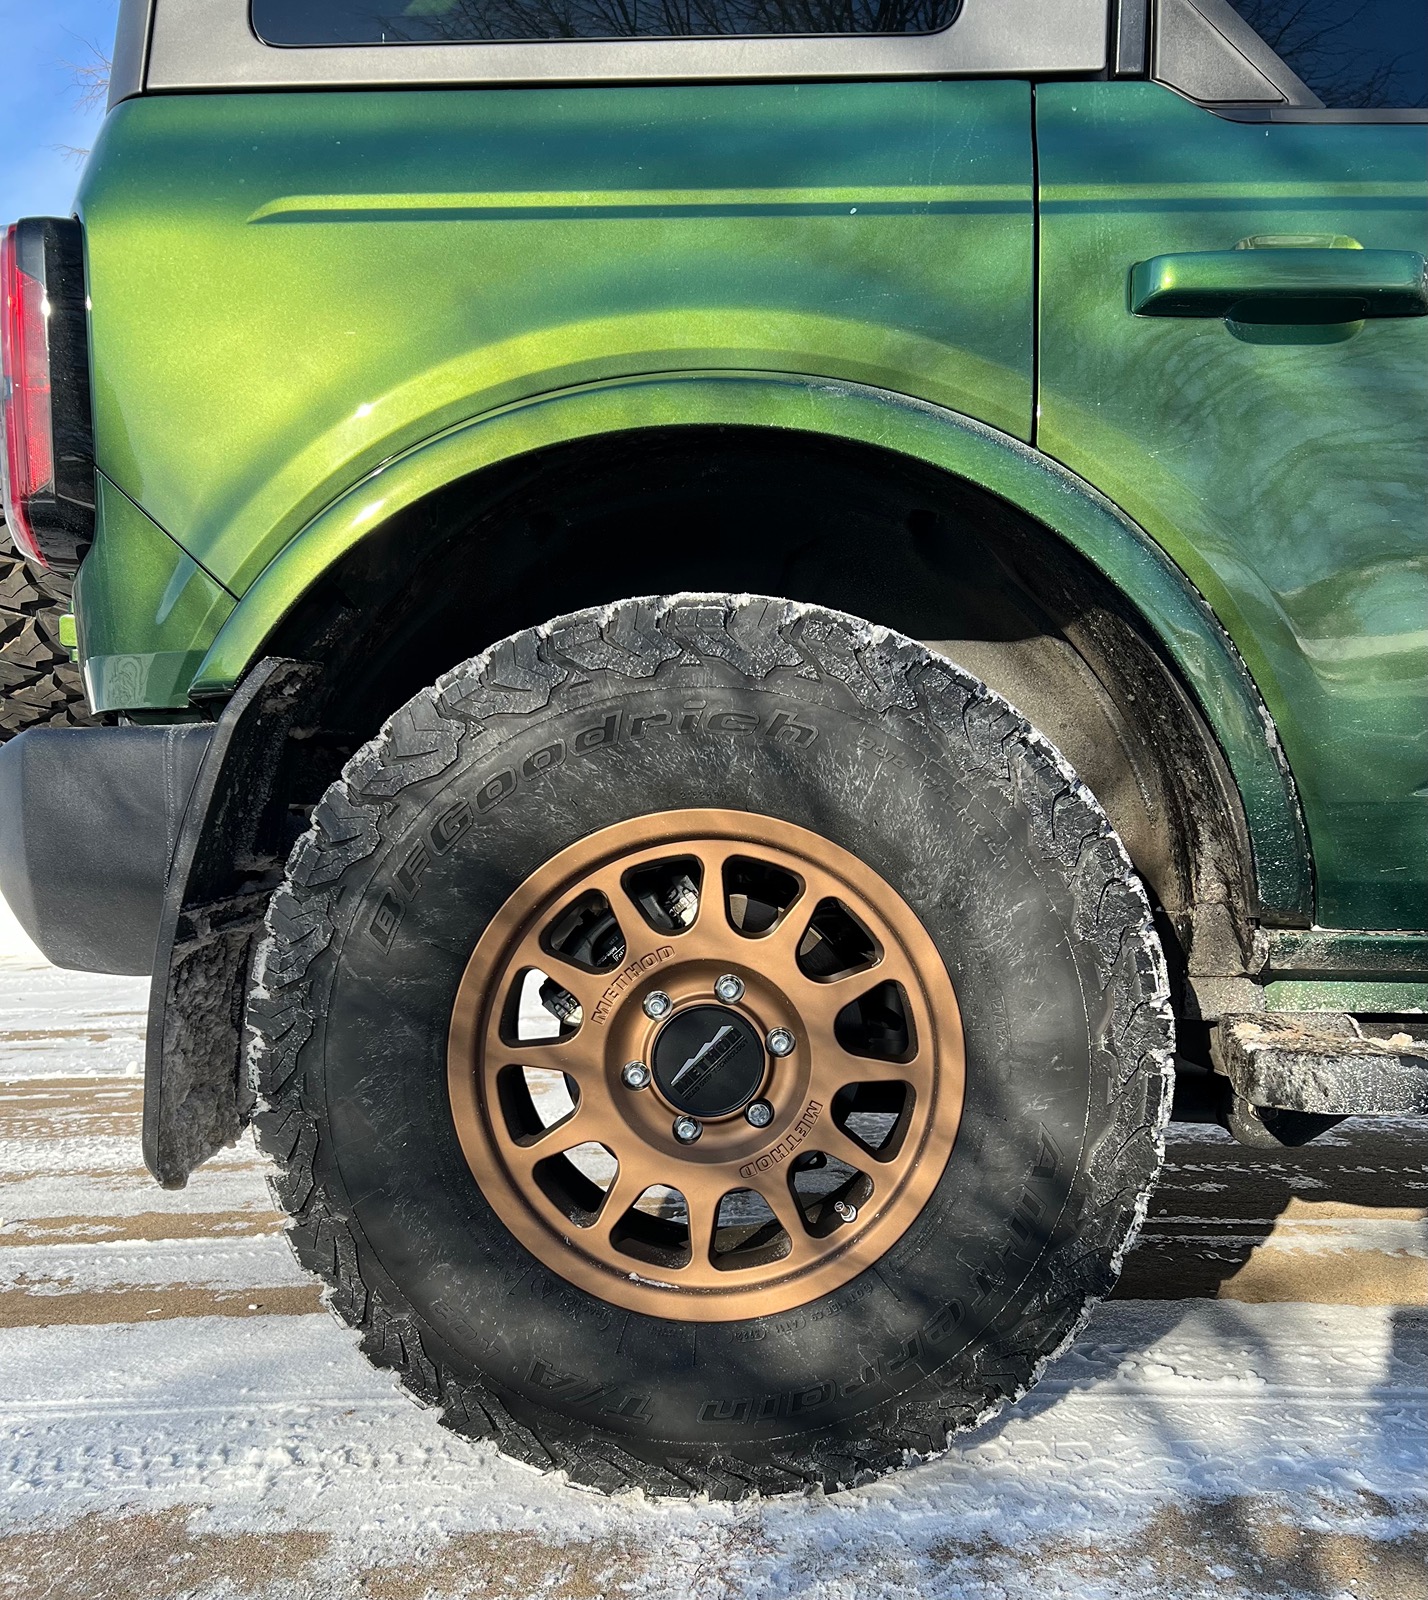 Ford Bronco 35x11.5R17  Tires (Nitto Ridge Grapplers) on Stock Badlands -- On and Off-Road Test IMG_5899